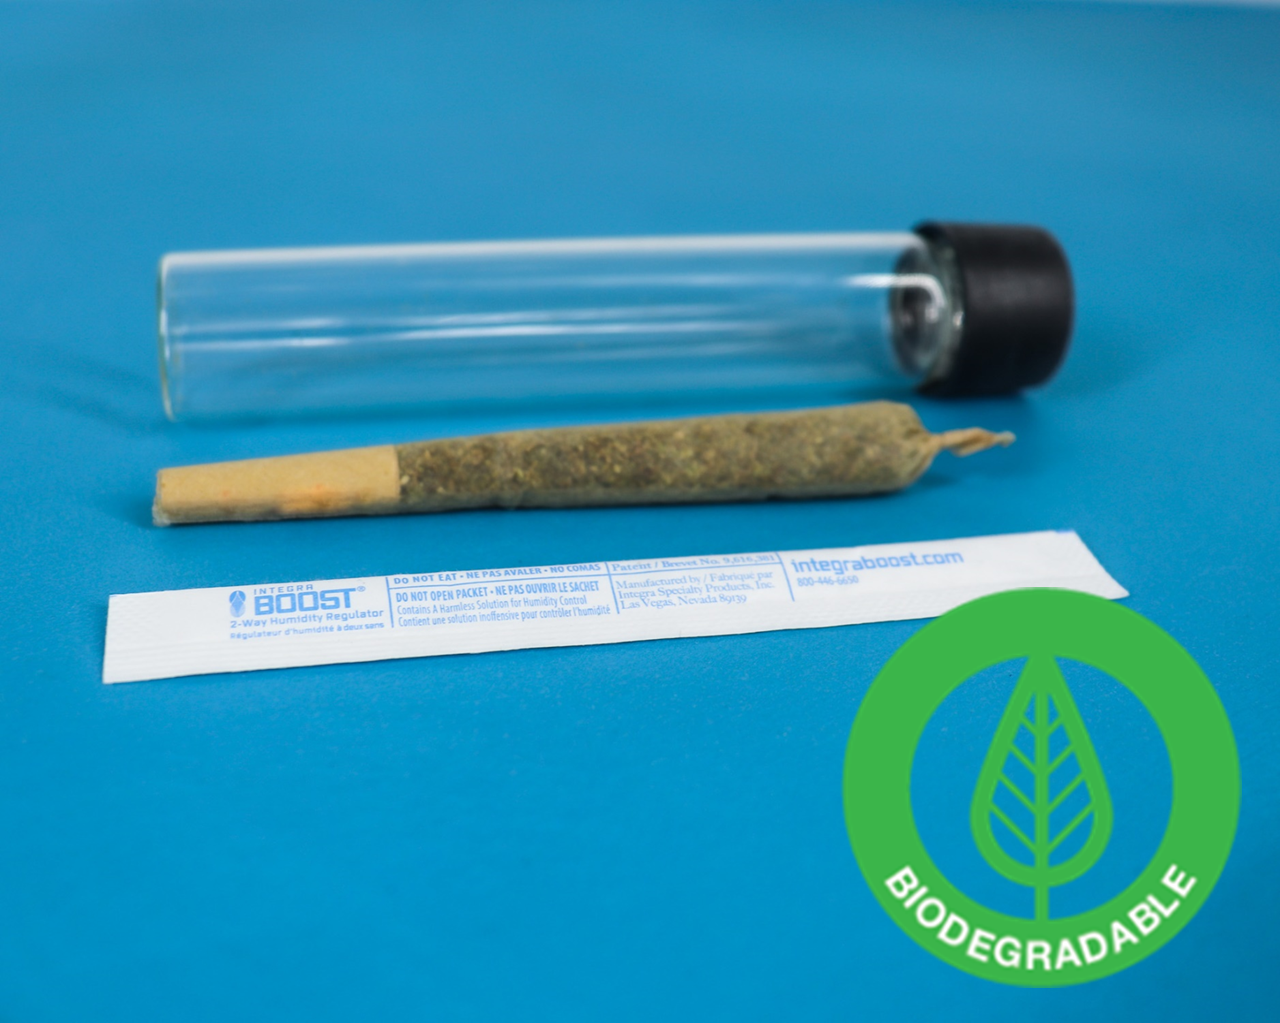 Integra biodegradable 62% rH, 110mm BOOST® Sticks use a patented plant-based, salt-free 2-way humidity control technology to expertly adapt to the air around them—either releasing or absorbing moisture as needed to maintain relative humidity (RH) in a container or tube.